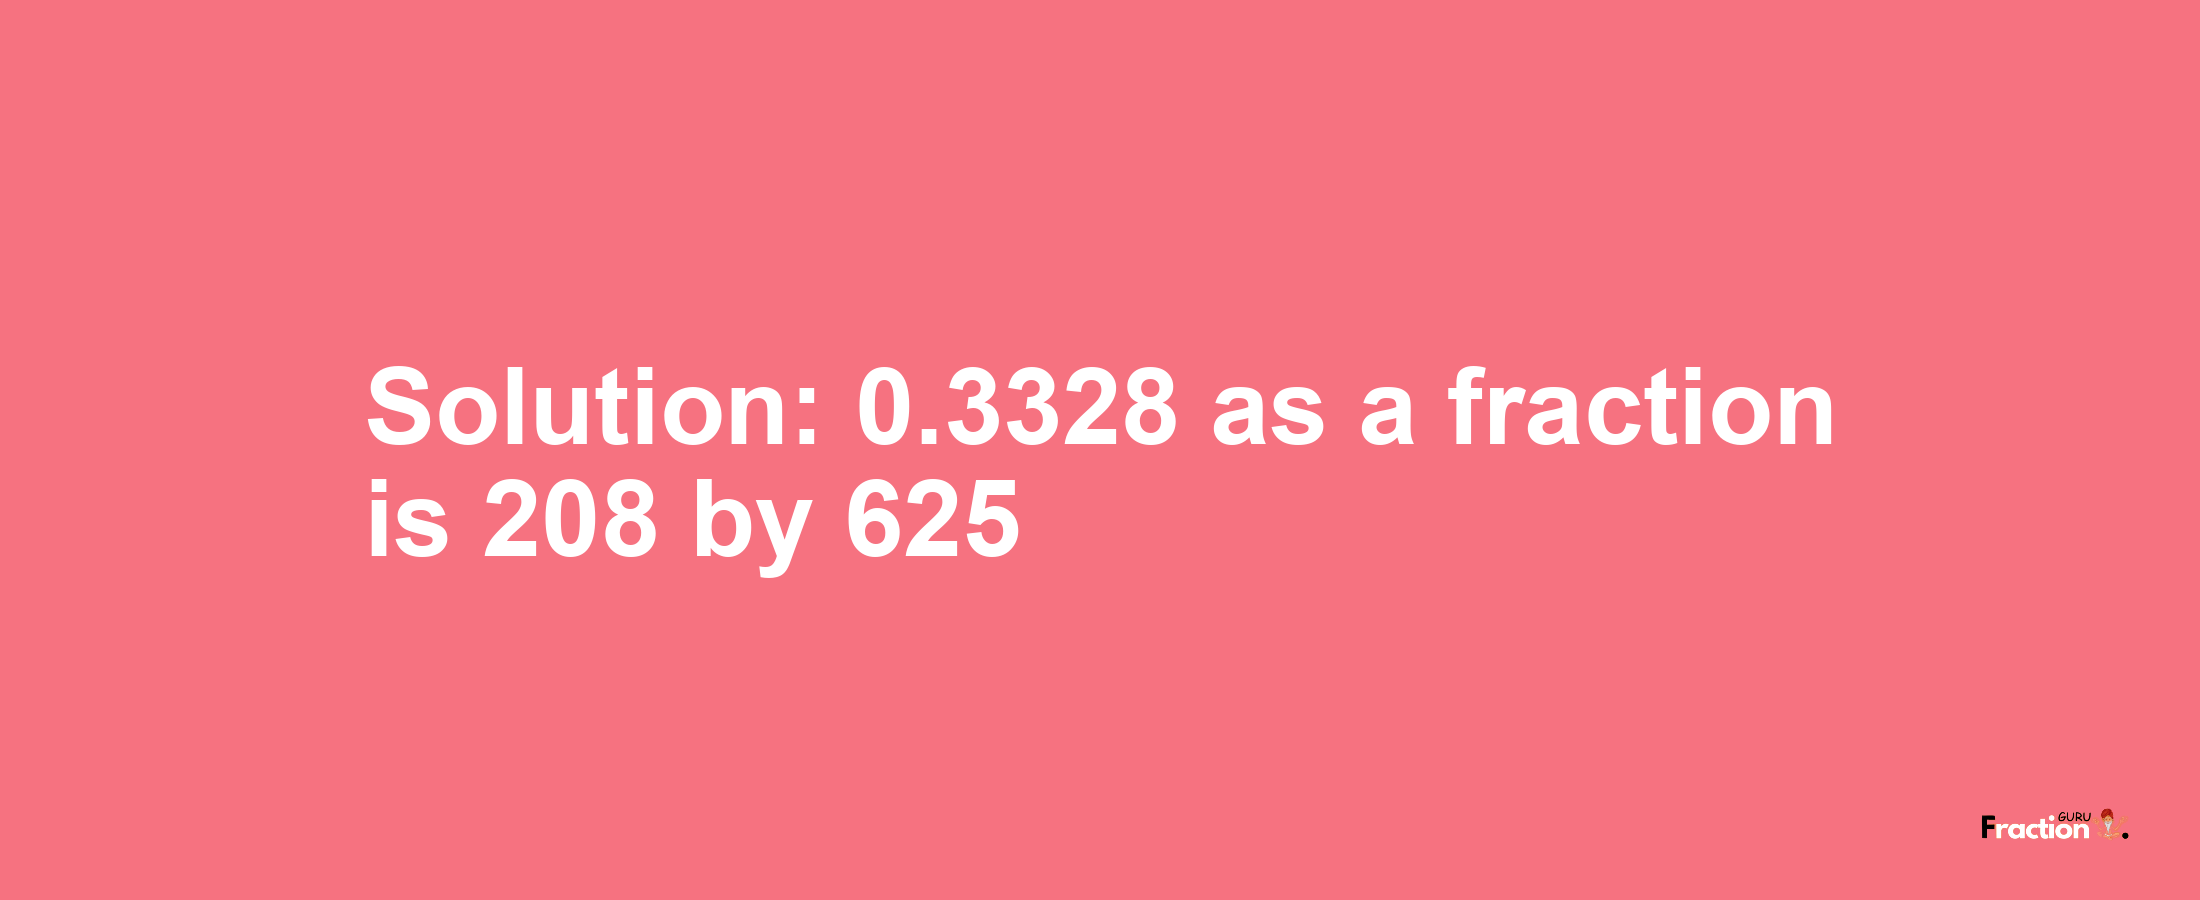 Solution:0.3328 as a fraction is 208/625